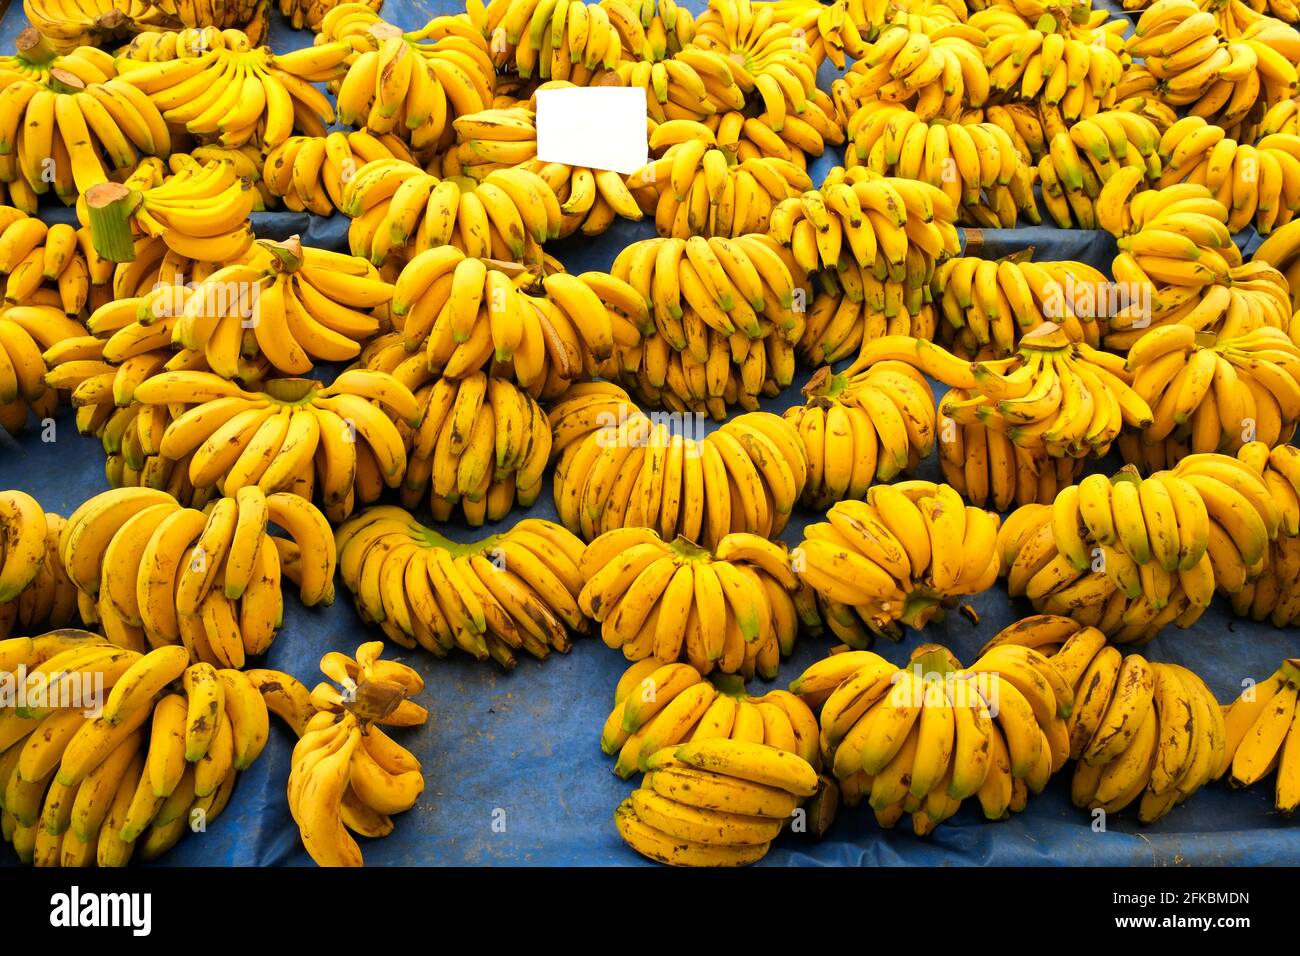 https://c8.alamy.com/comp/2FKBMDN/clean-eating-concept-bunch-of-ripe-yellow-organic-cavendich-banana-hands-w-blank-price-tag-at-local-farmers-market-supermarket-display-healthy-nutr-2FKBMDN.jpg